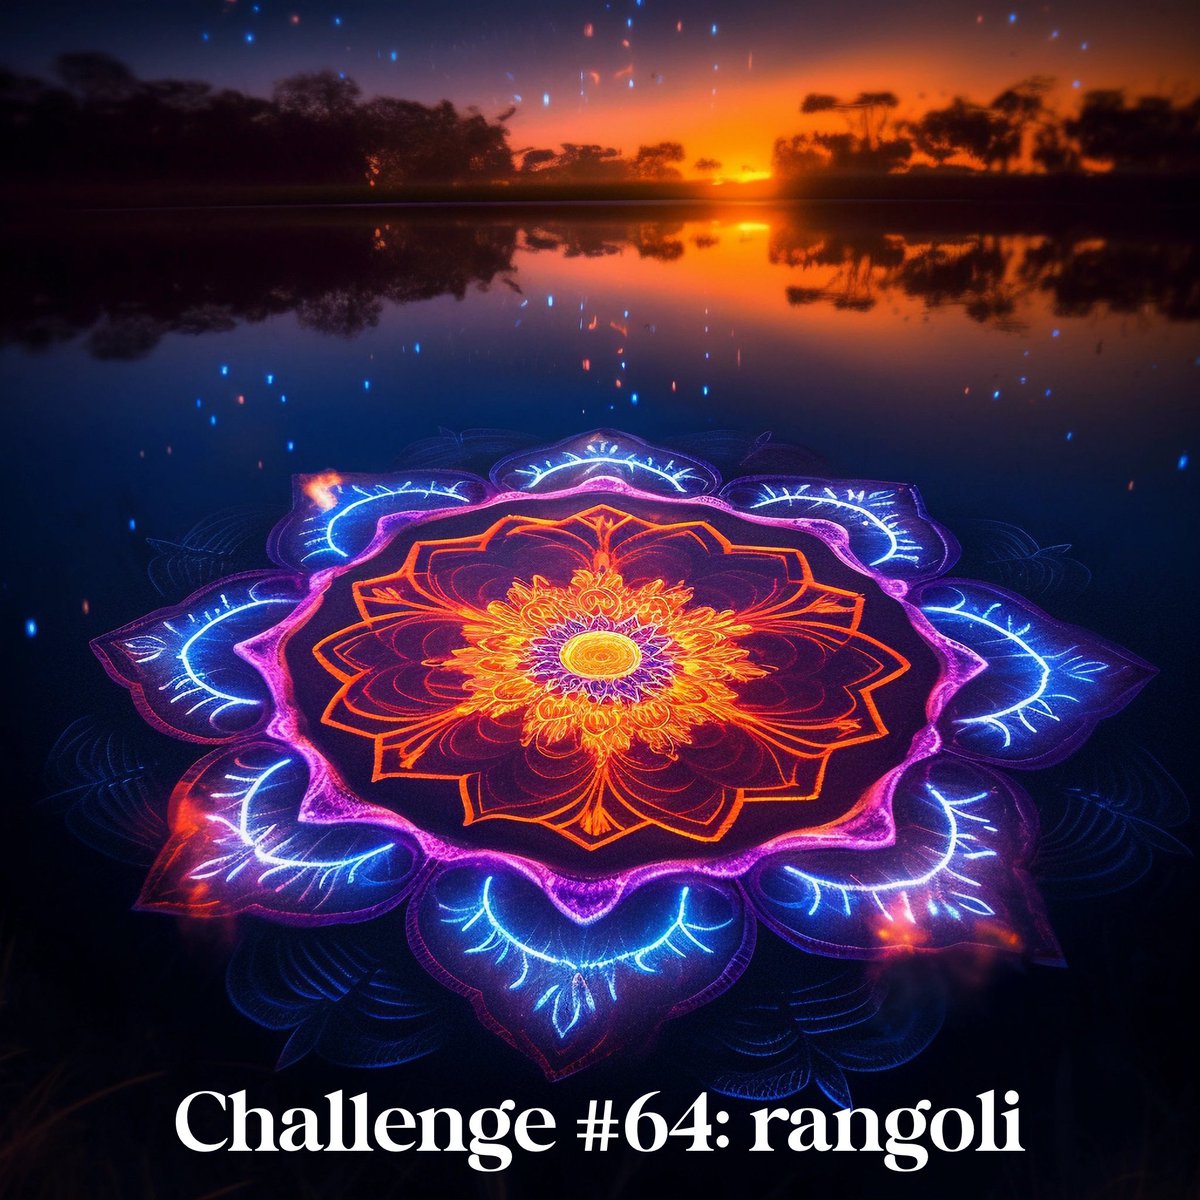 PROMPT CHALLENGE #64: RANGOLI Rangoli is a traditional art form originating in India. It involves creating decorative designs on the ground or floor using colored powders, rice, flower petals, or other materials. Rangoli is typically made during festivals and special occasions…